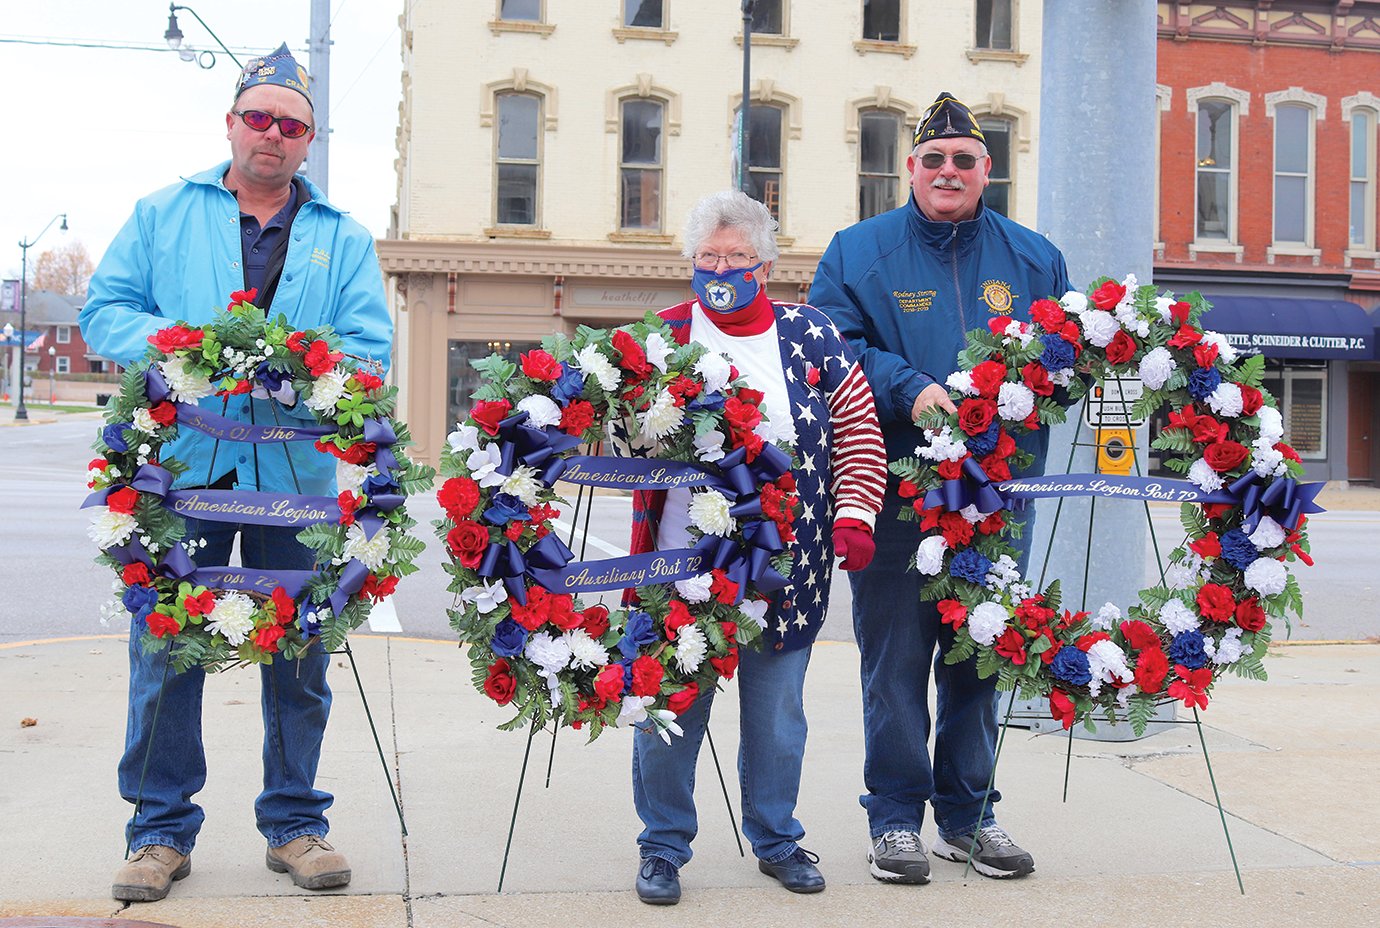 Sons of the American Legion President Keith Switzer, from left, Legion Auxiliary President Rosemary Hutchison and Legion Post 72 Commander Rodney Strong prepare to place ceremonial wreaths on the city's Soldier's and Sailor's Monument on Veterans Day.